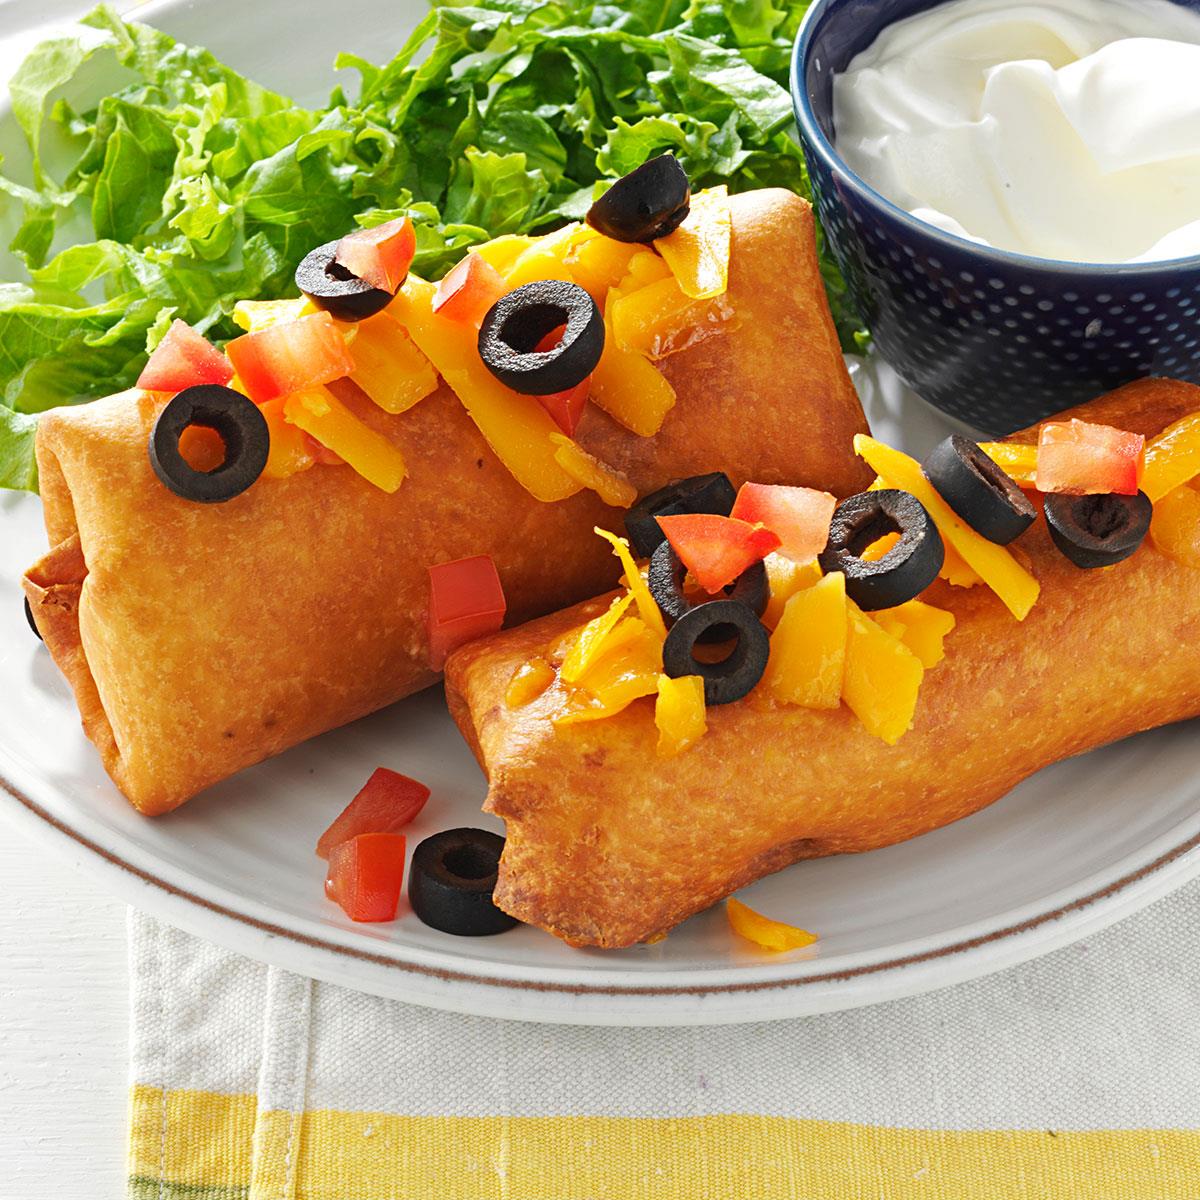 Beef and Bean Chimichangas image